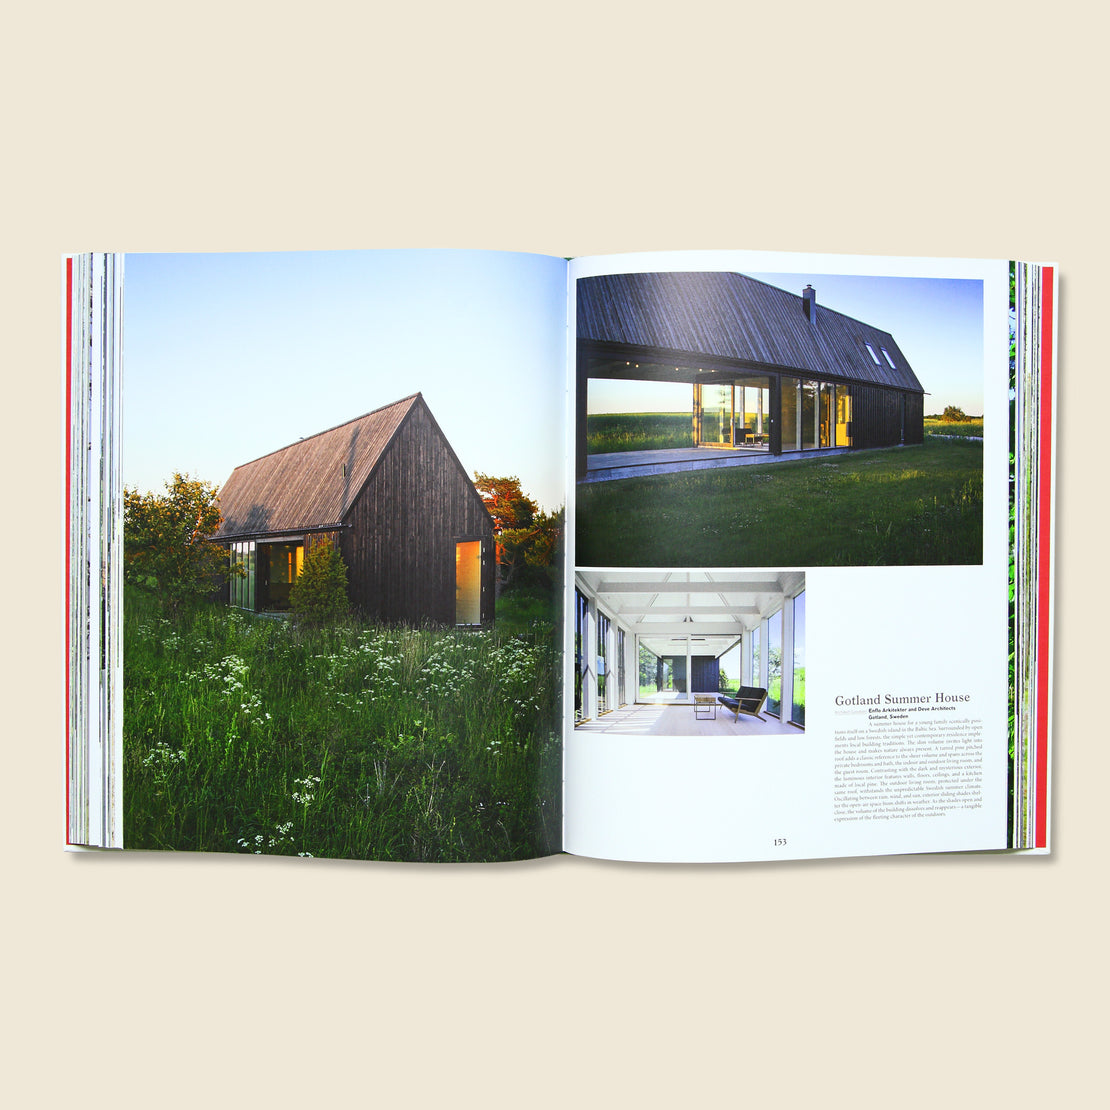 Hide and Seek: The Architecture of Cabins and Hideouts -  Sofia Borges - Bookstore - STAG Provisions - Gift - Books